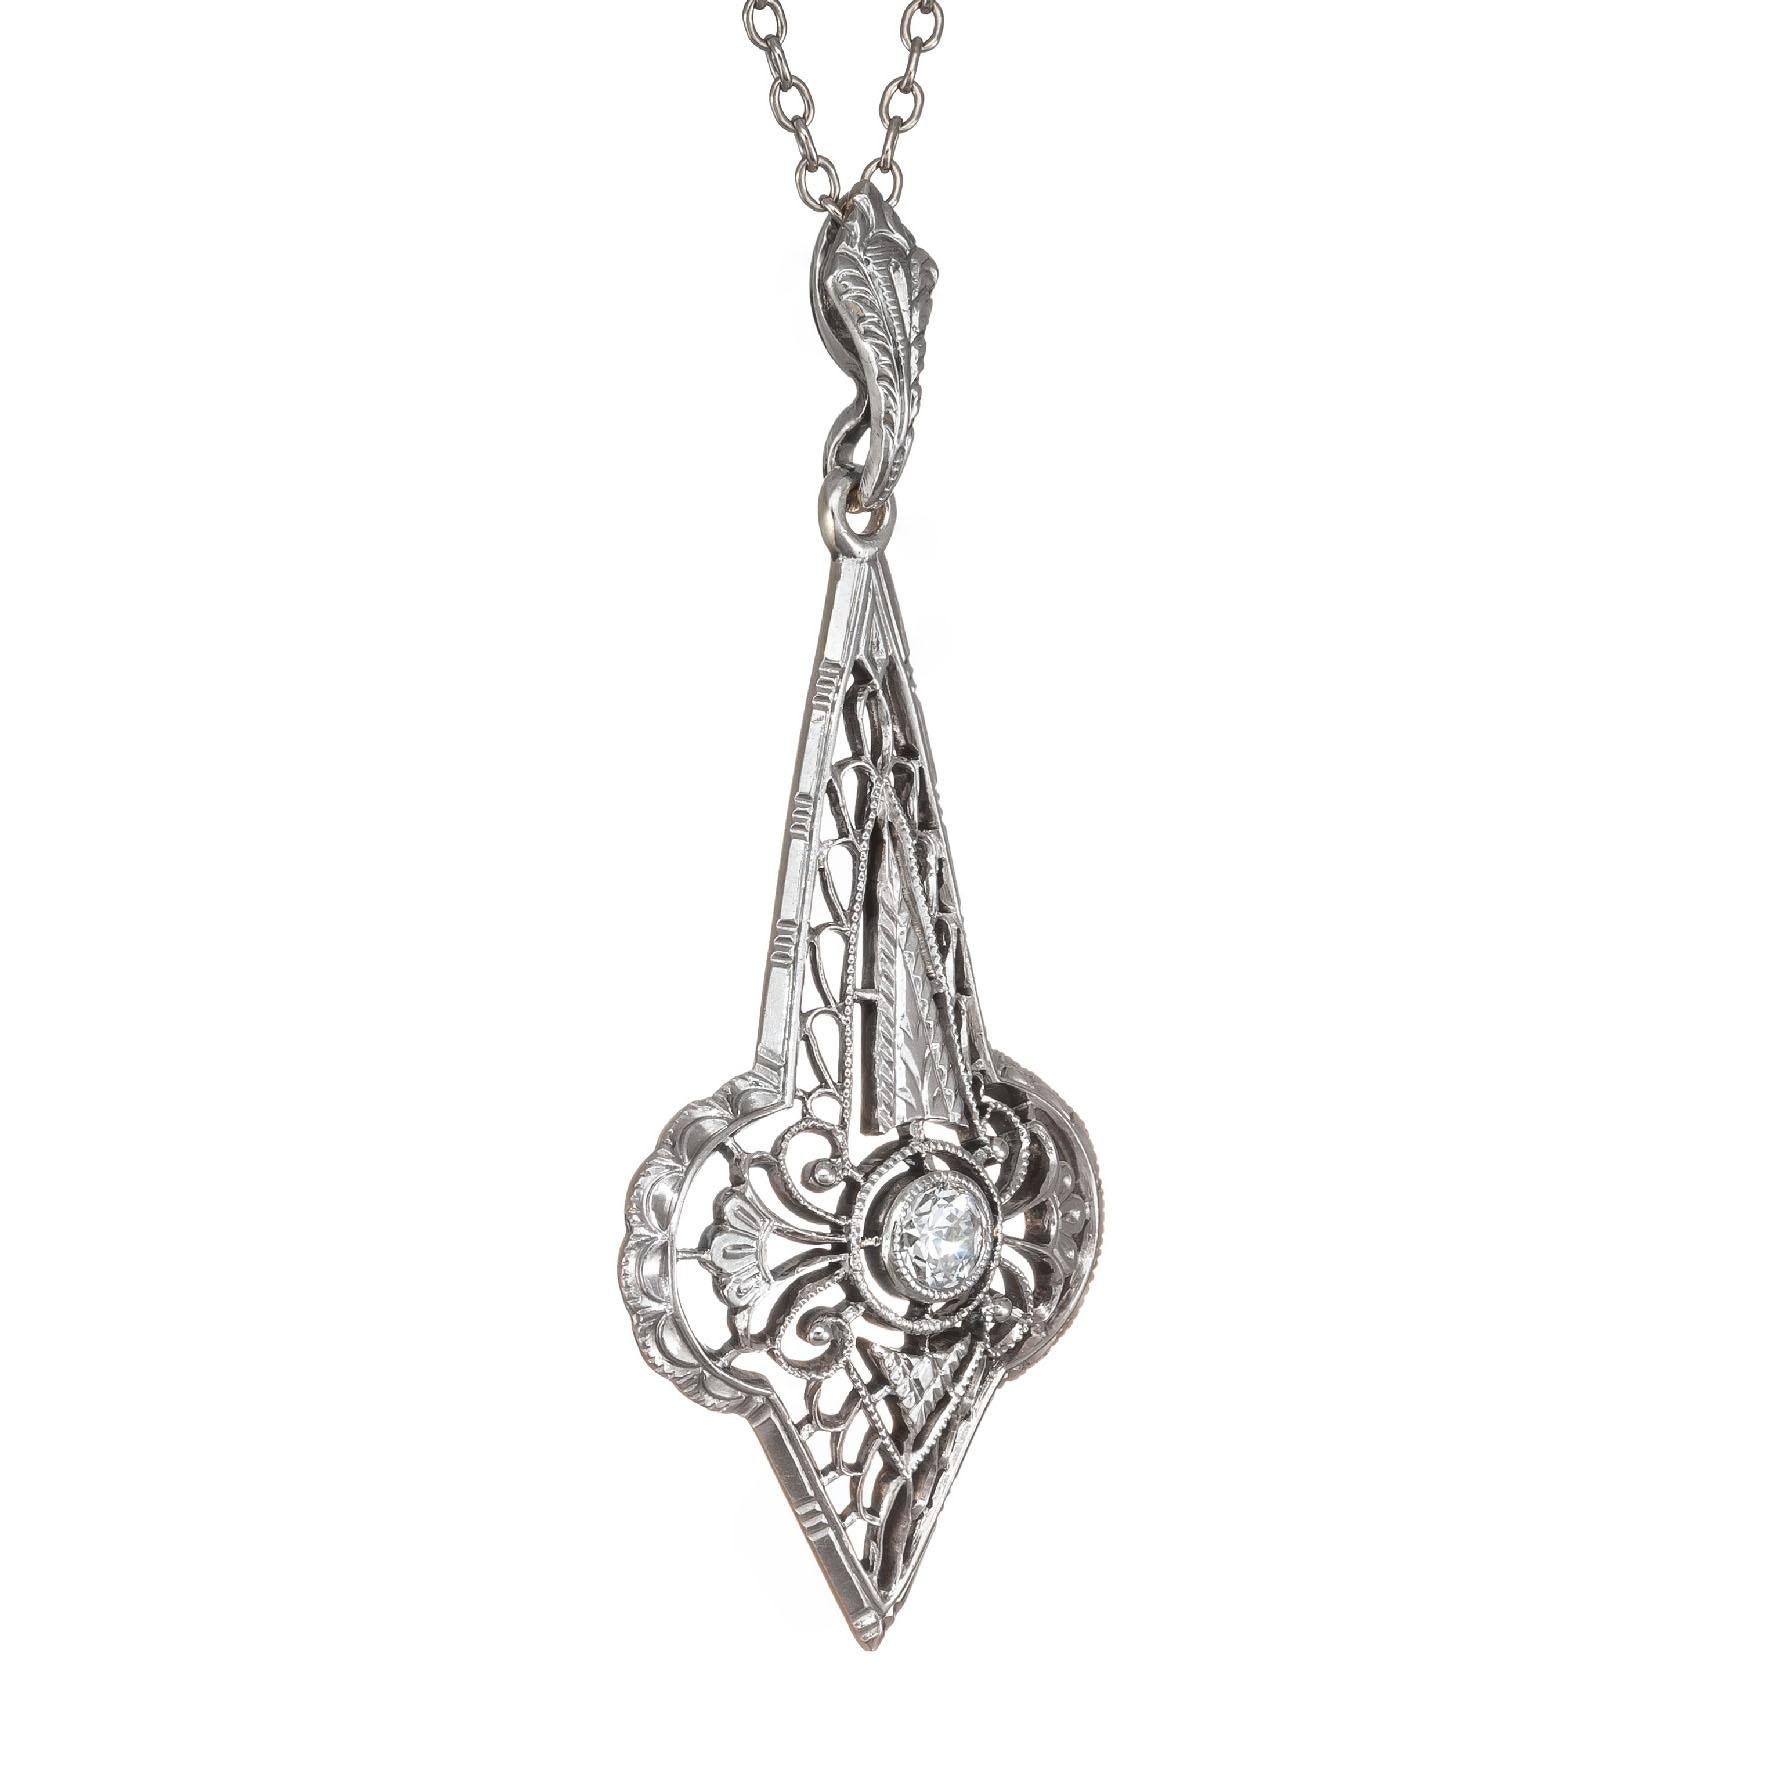 1930's filigree Art Deco pendant necklace. Old Euro center diamond in 14k white gold on a 16 inch 14k white gold chain. Front of the pendant is white gold with a 14k yellow gold back. 

1 old euro diamond approx total weight:  .10cts G, VS2
Chain